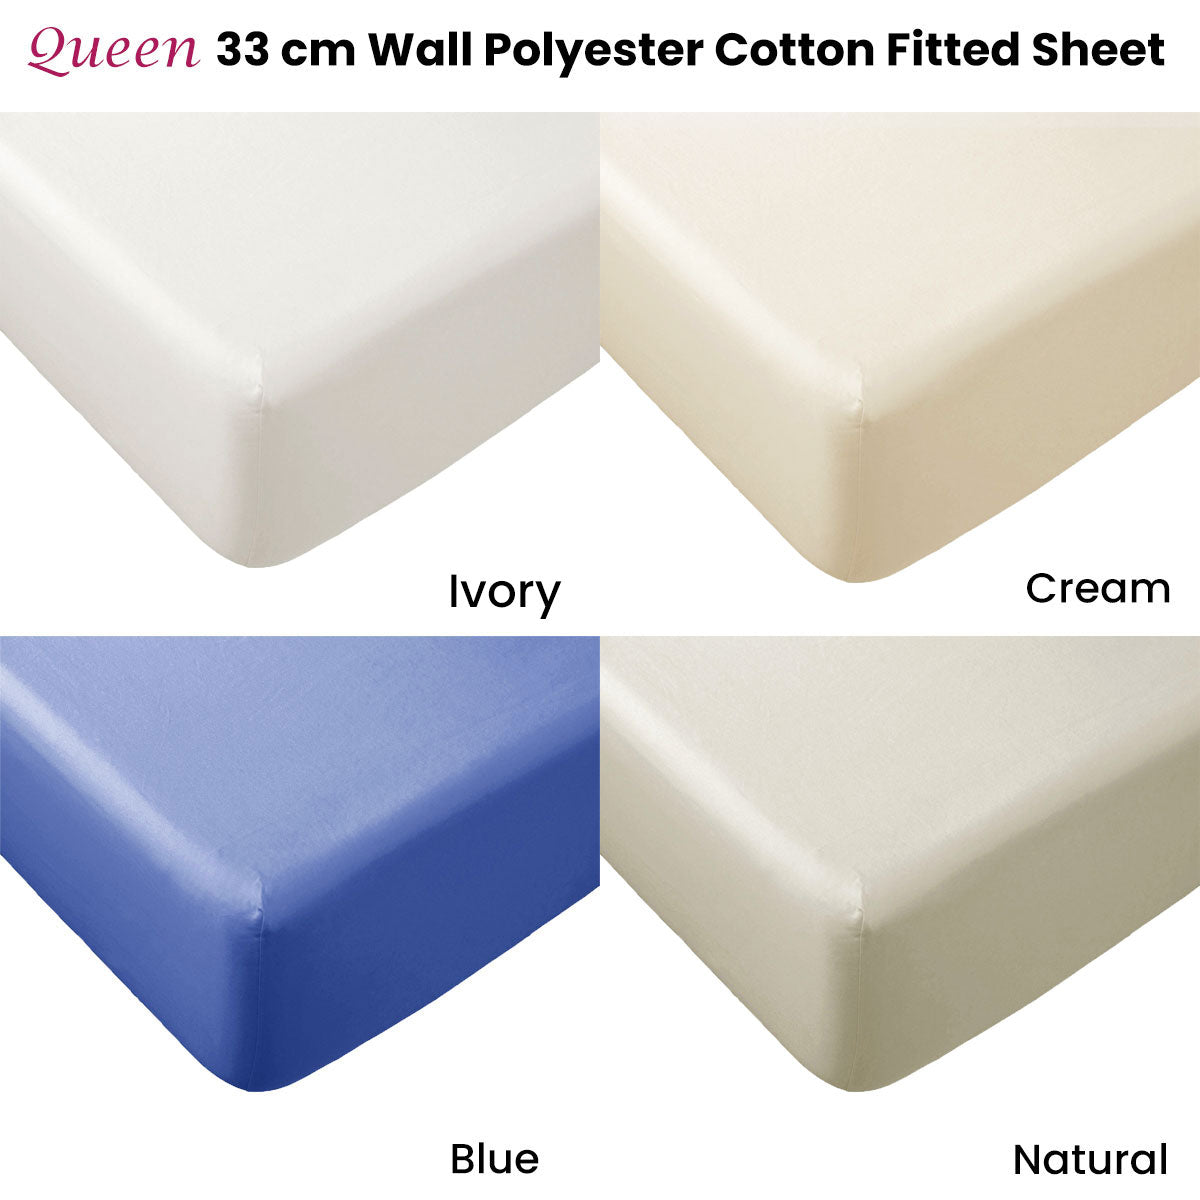 Essentially Home Living Polyester Cotton Fitted Sheet 33cm Wall Queen Ivory